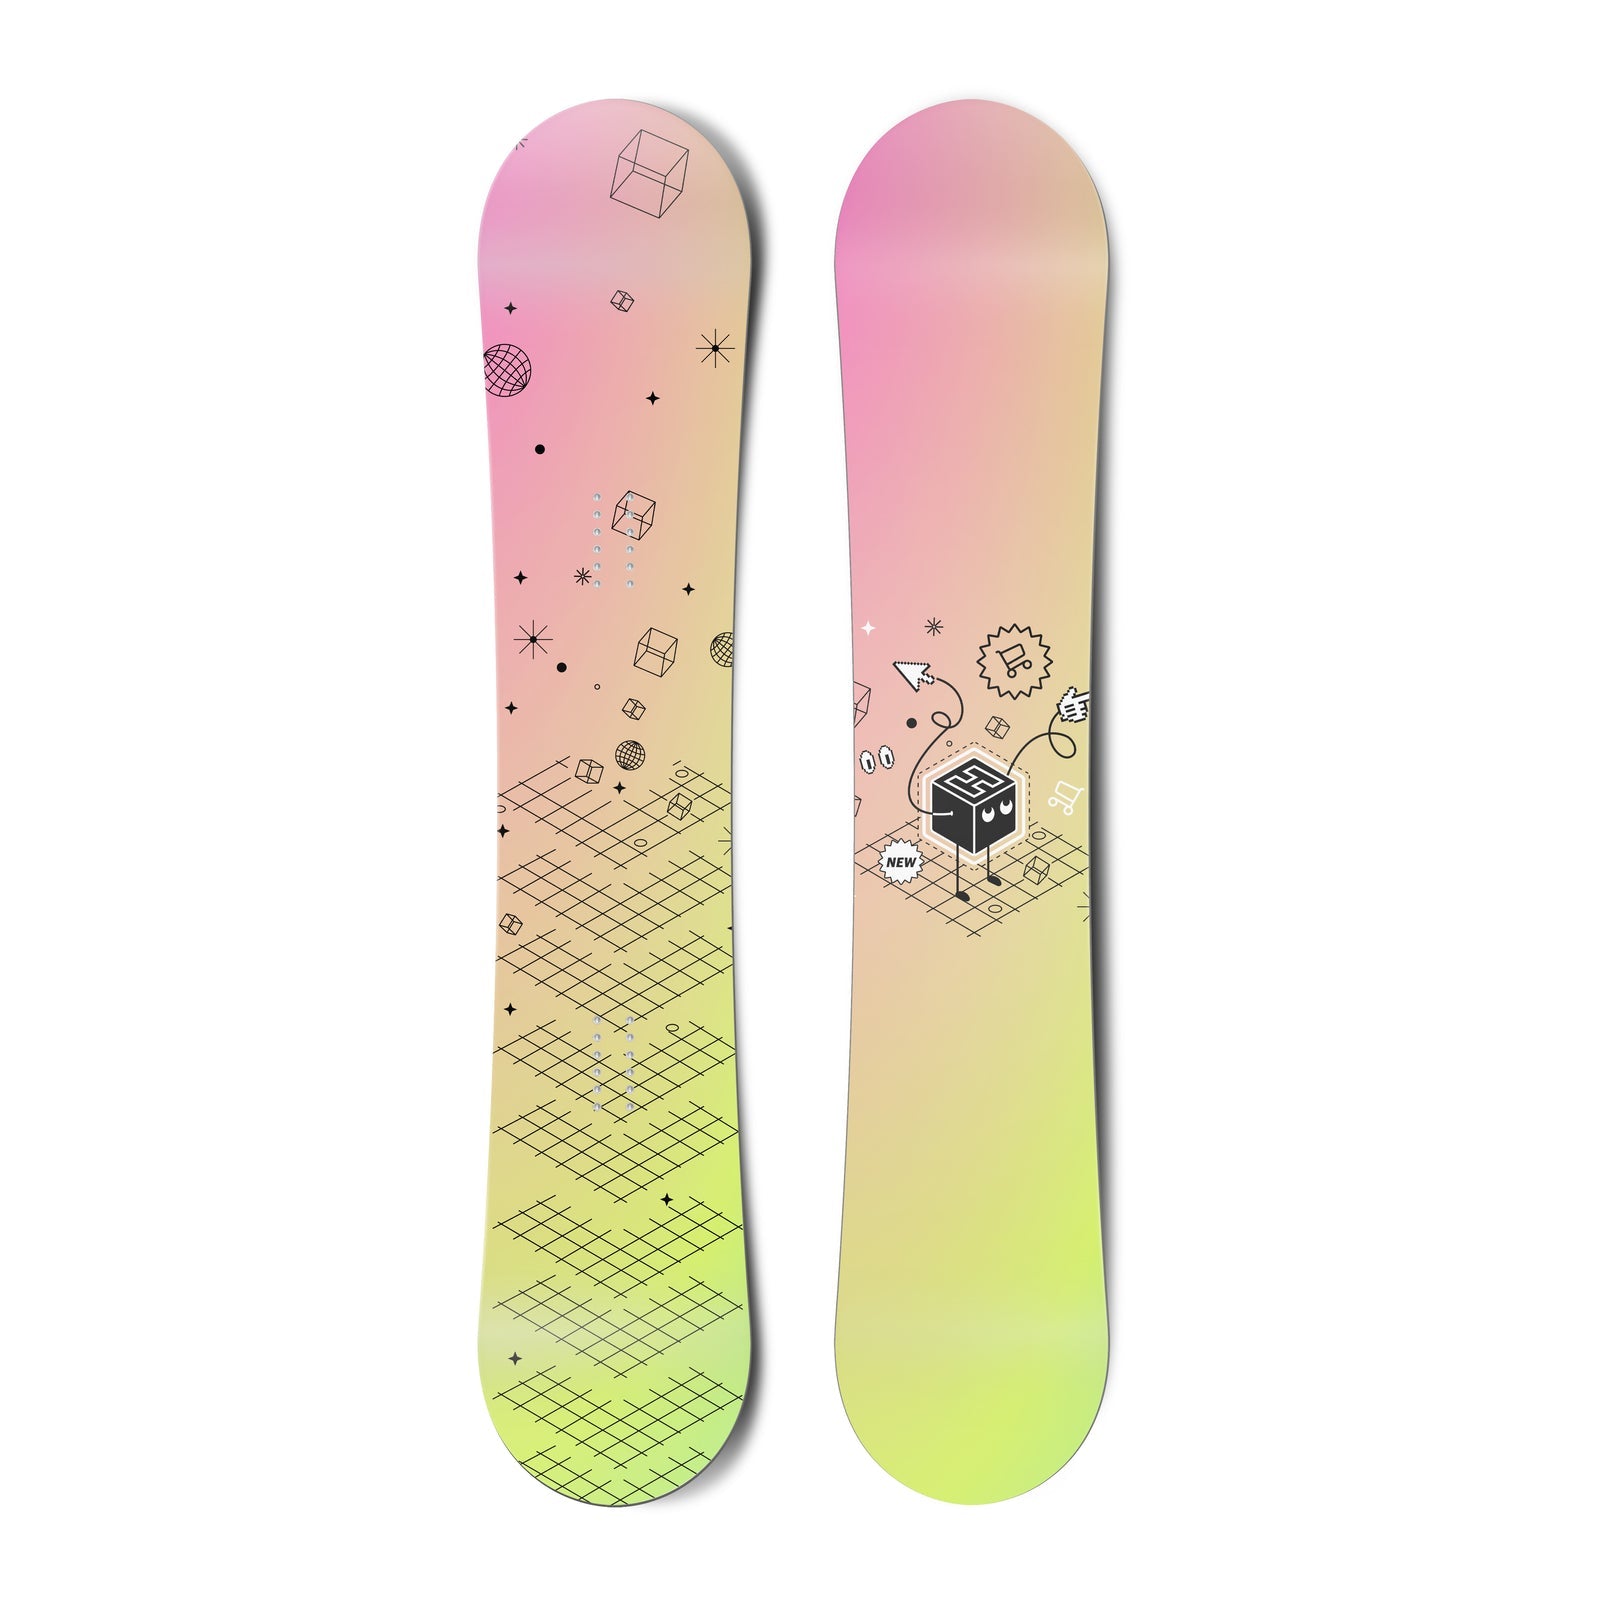 The Multi-managed Snowboard